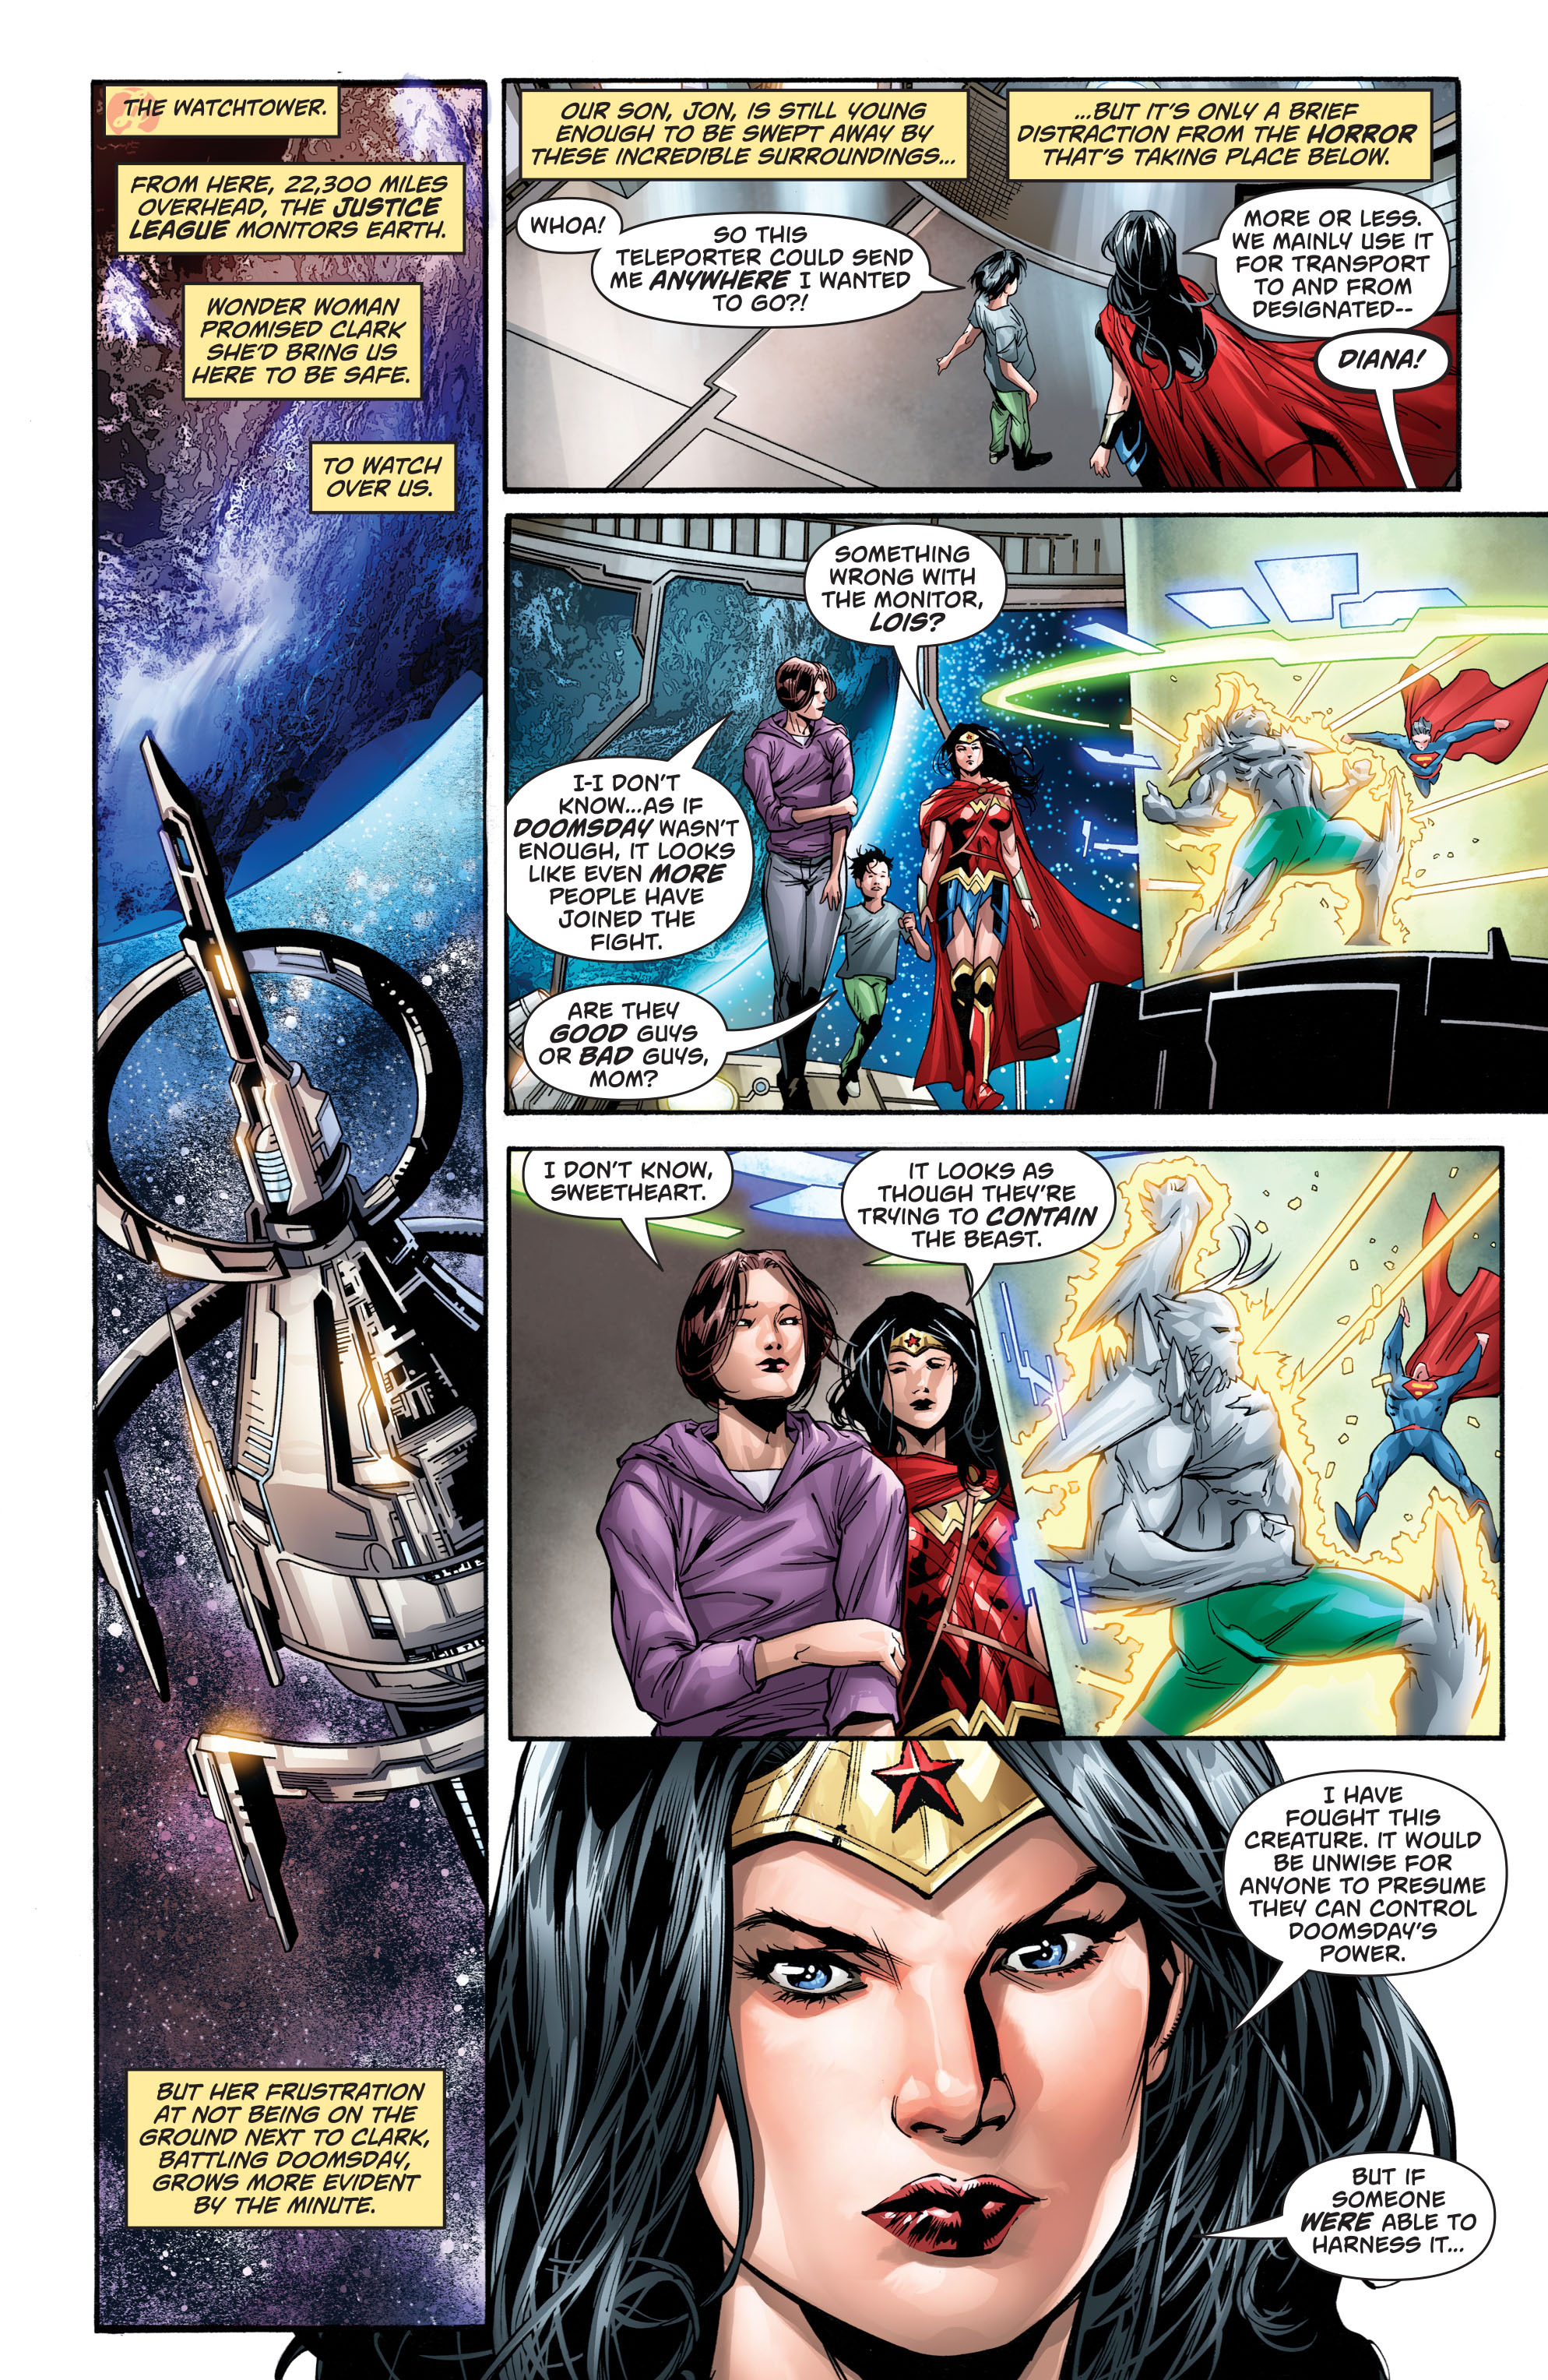 Action Comics (2016-): Chapter 962 - Page 4